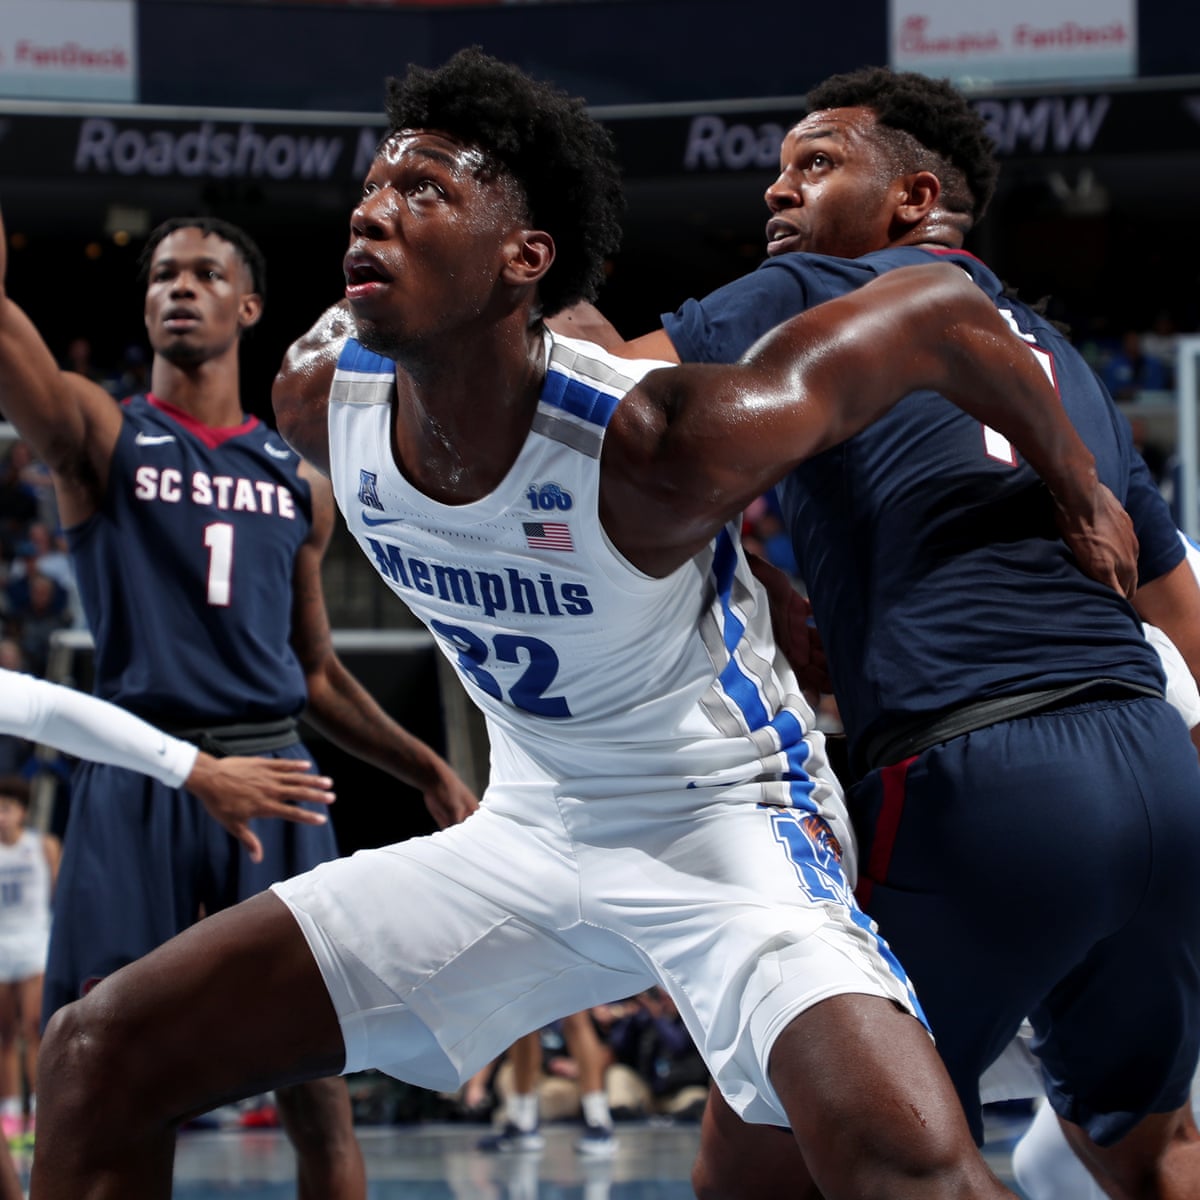 James Wiseman, potential No 1 pick in NBA draft, declared ineligible by school | College basketball | The Guardian